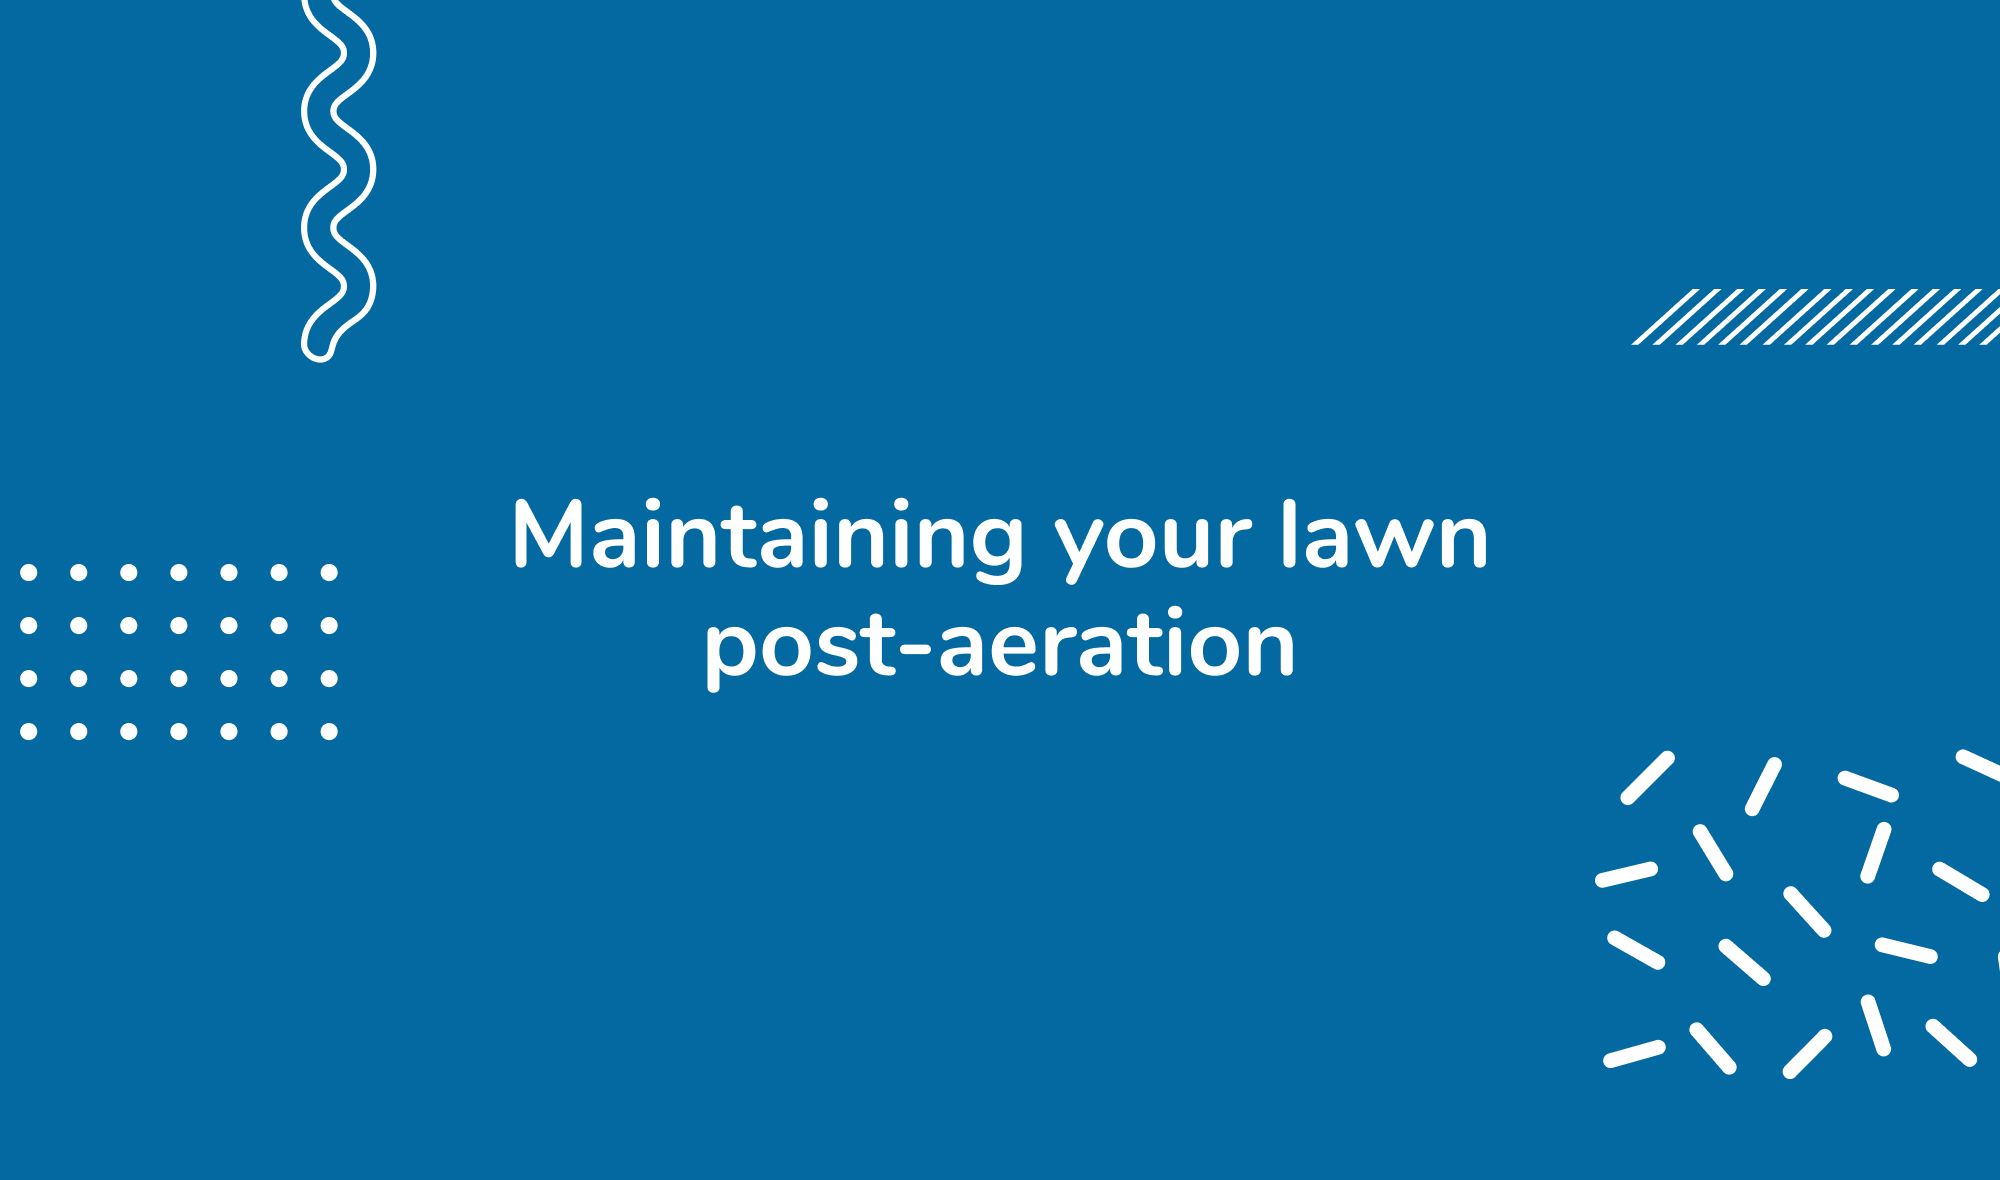 Maintaining your lawn post-aeration